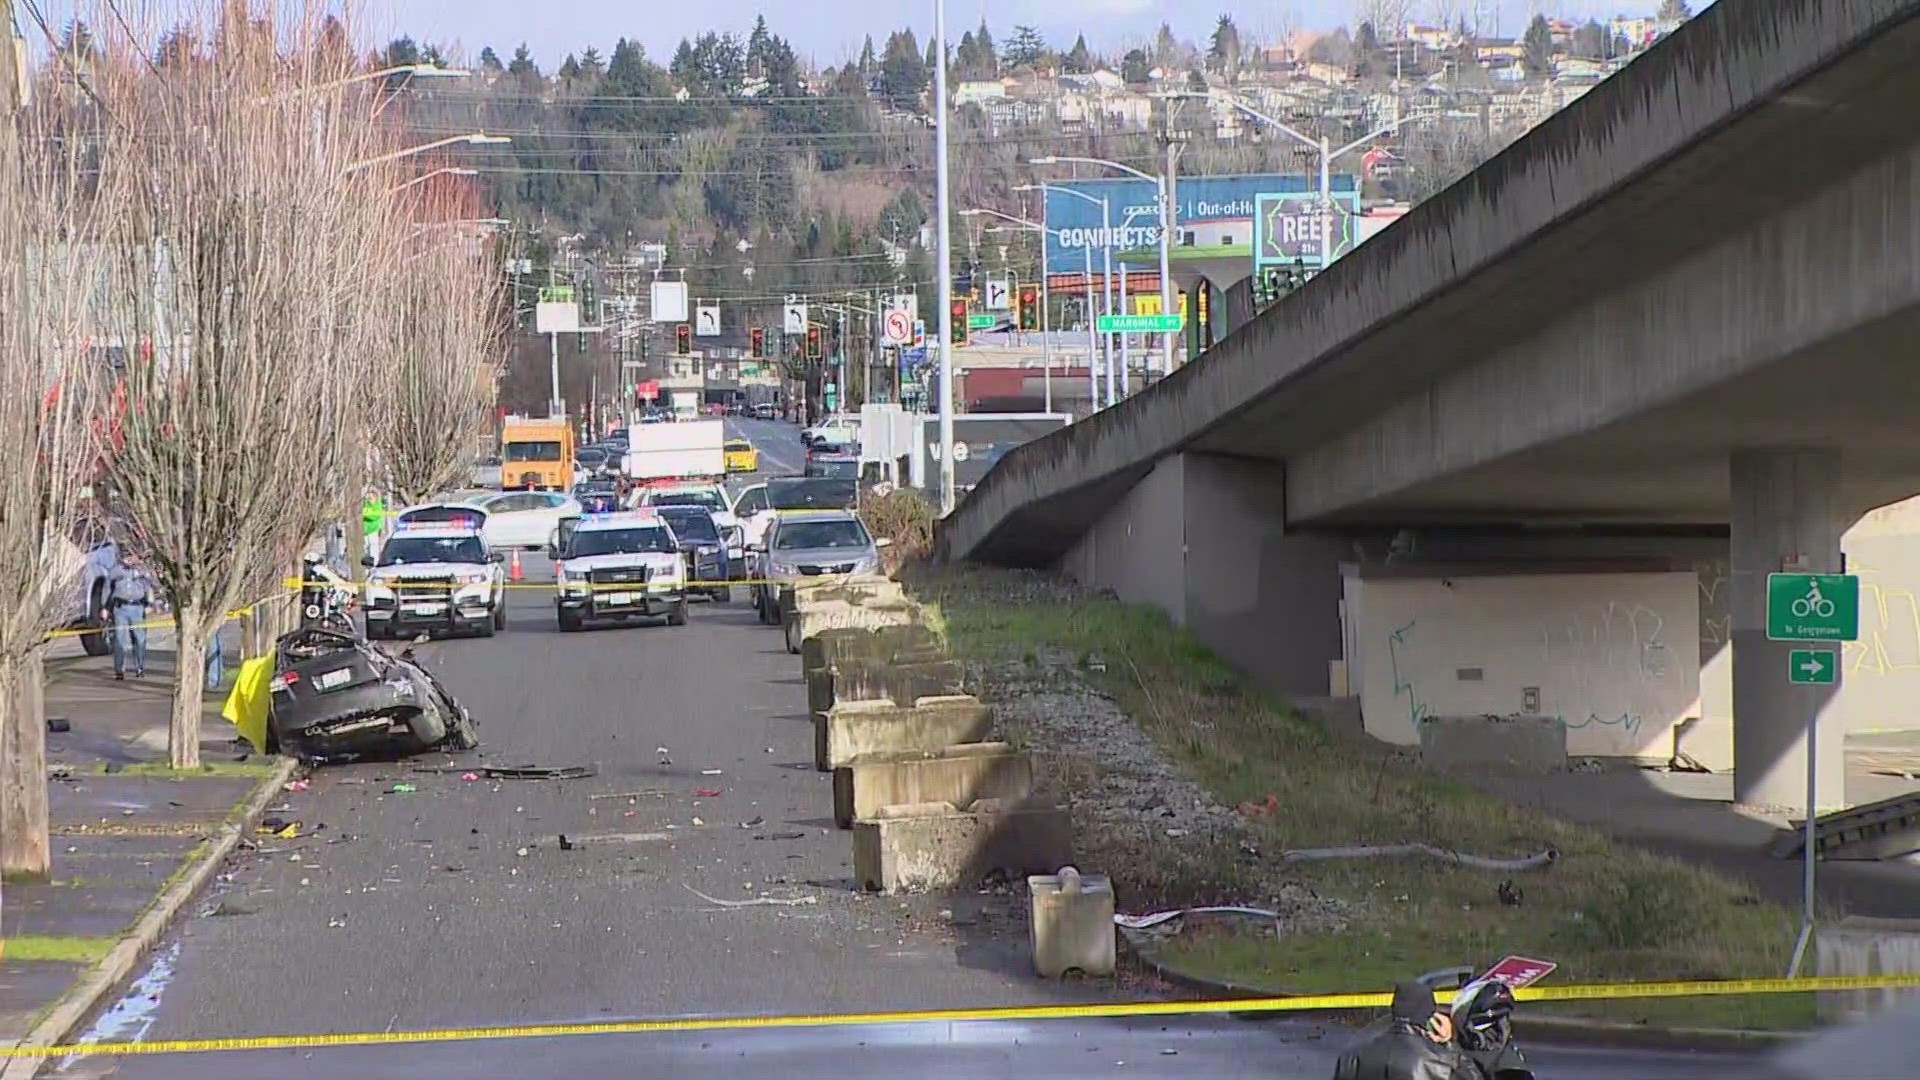 One person was found dead after a car drove off an overpass from the First Avenue Bridge in Seattle on Tuesday.